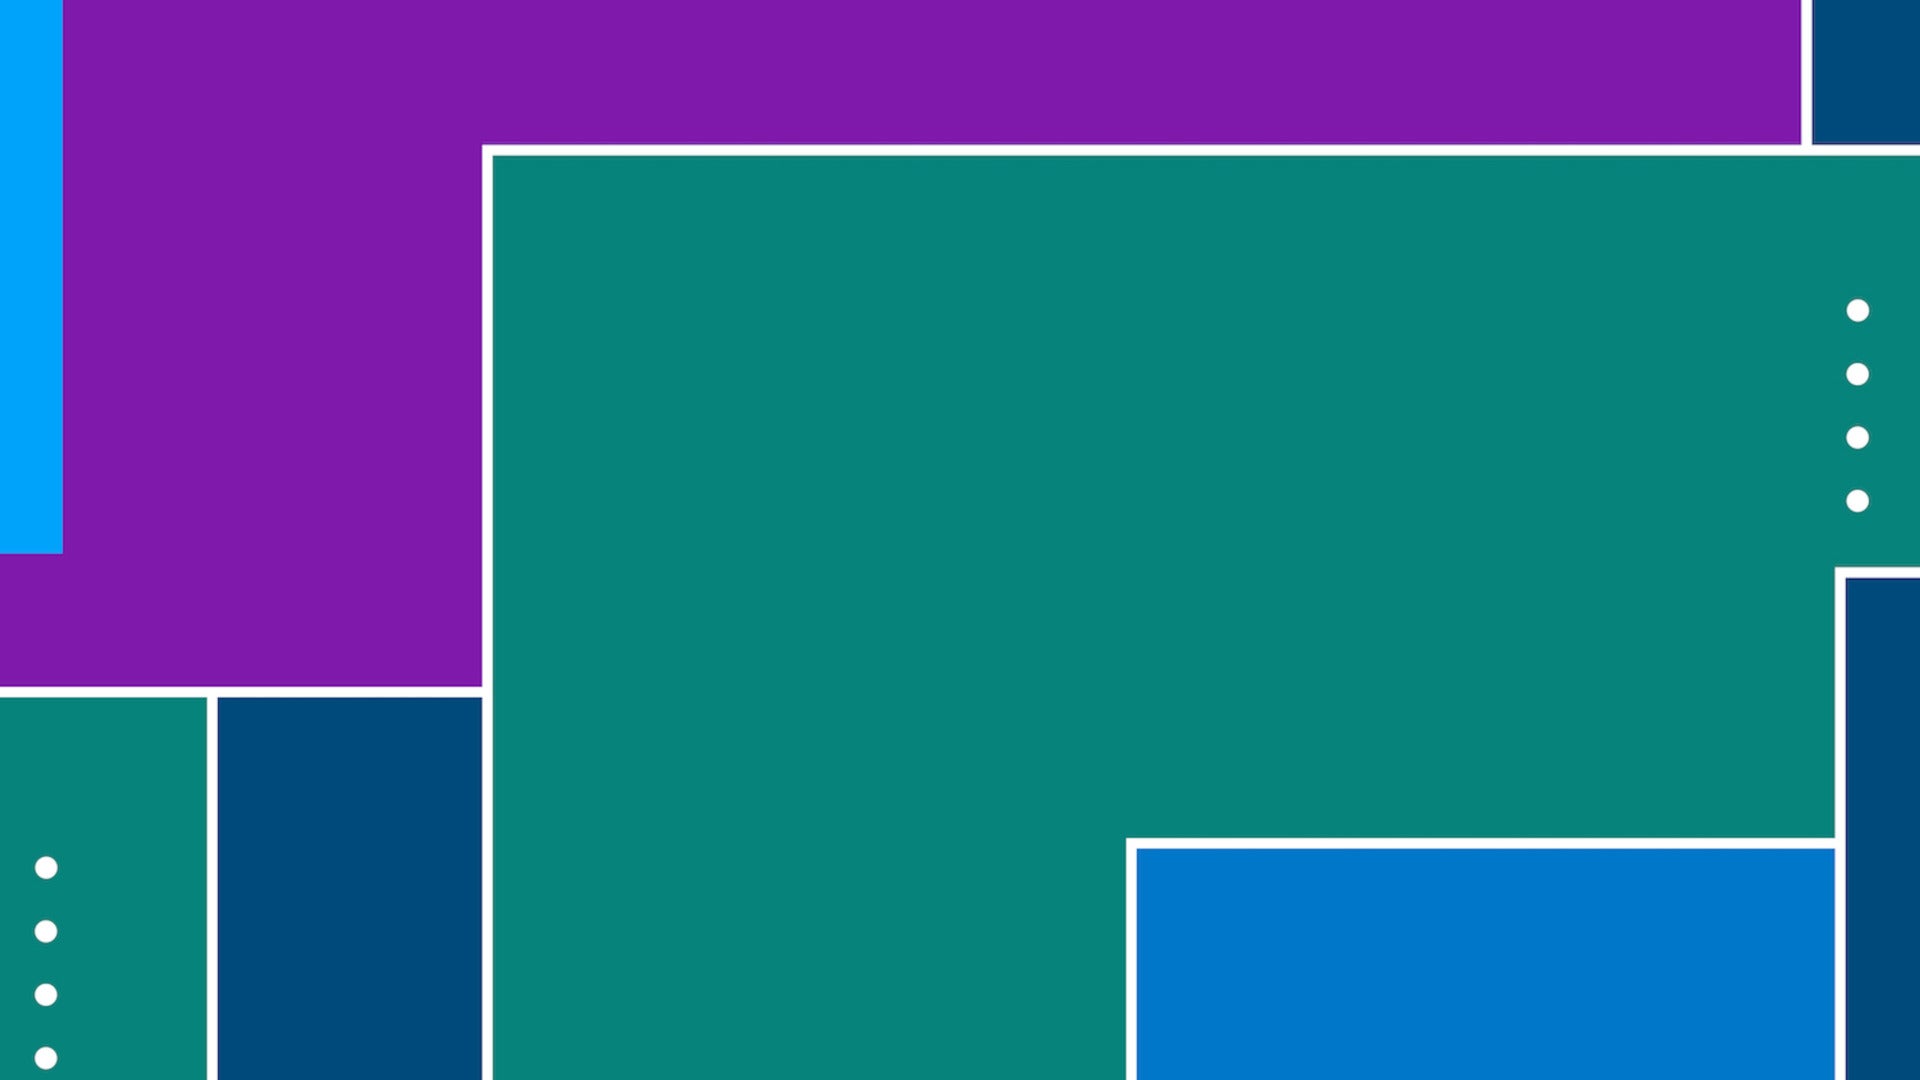 An abstract geometric illustration in purple, teal, and blue.